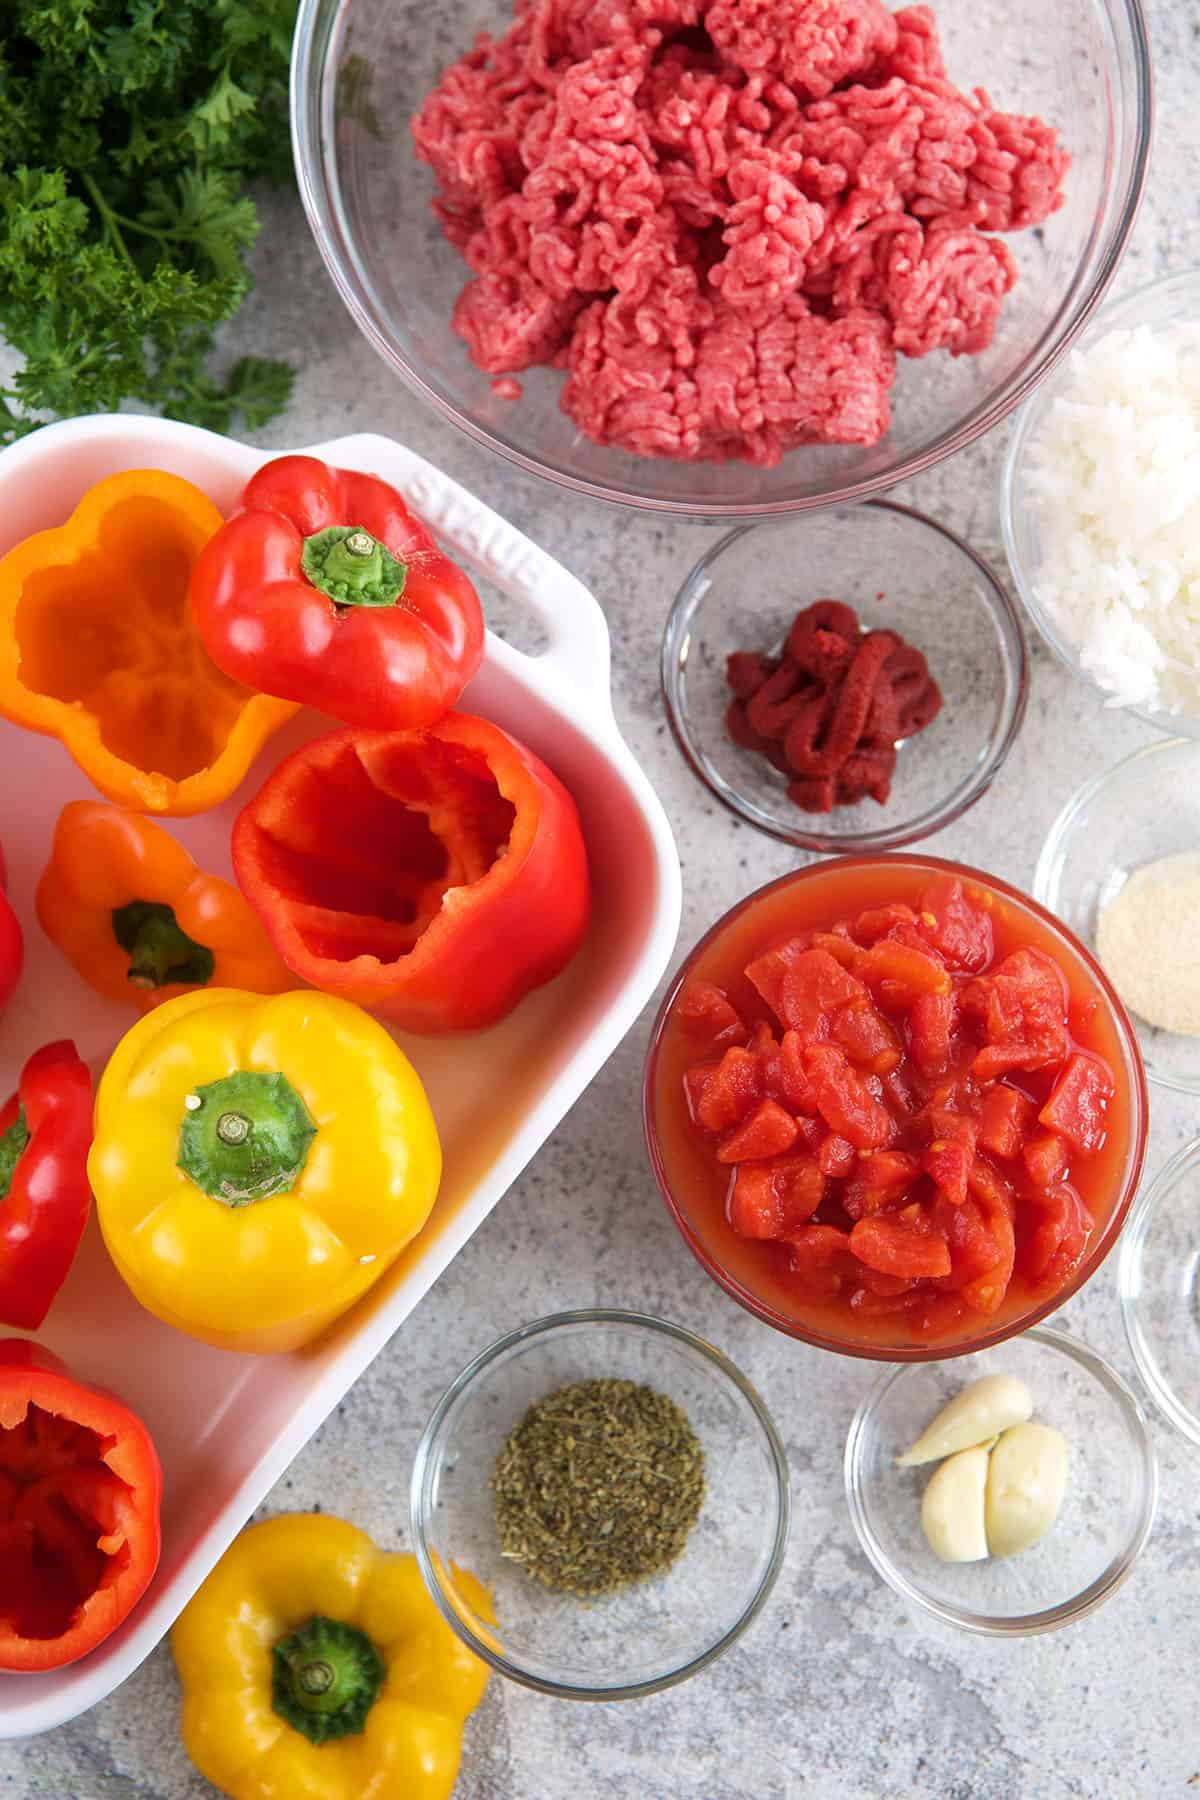 The ingredients for stuffed bell peppers are placed on a surface.